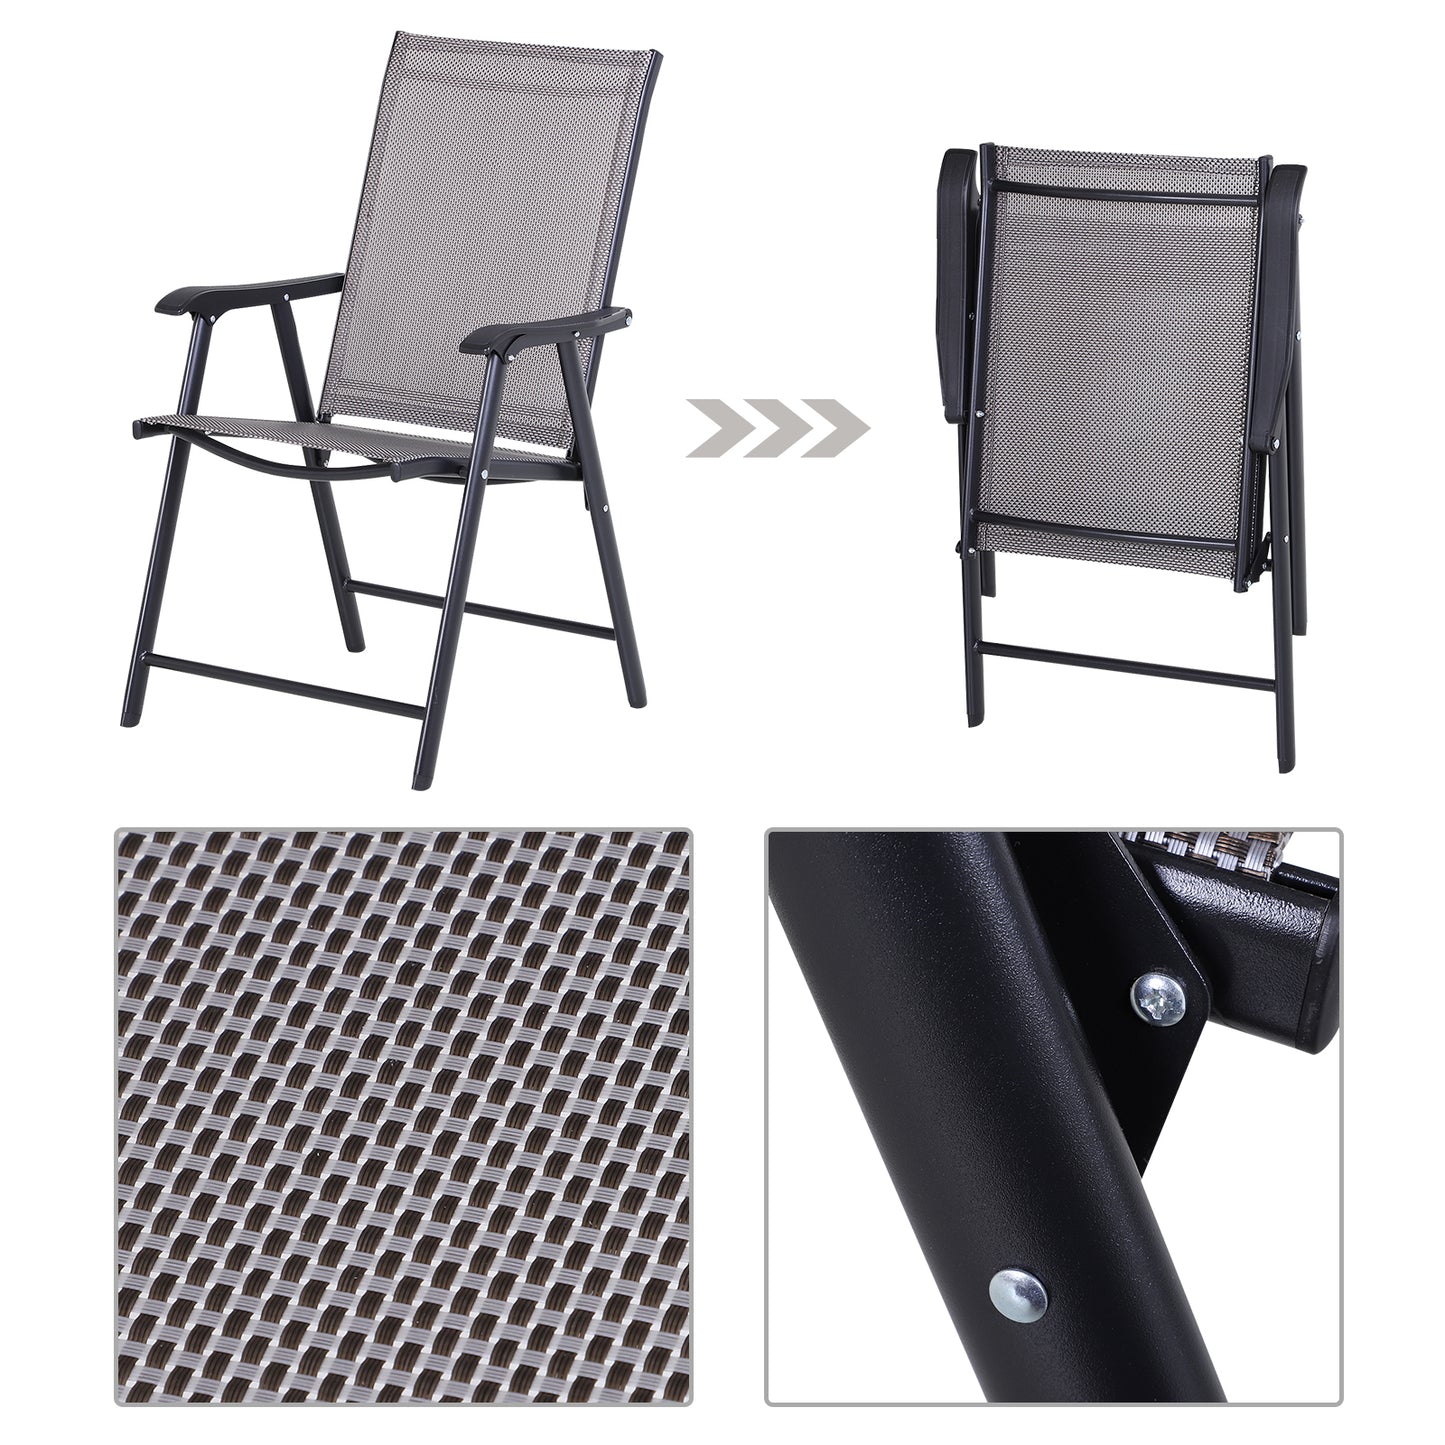 Outsunny Set of 2 Foldable Outdoor Garden Chairs Steel Frame Grey